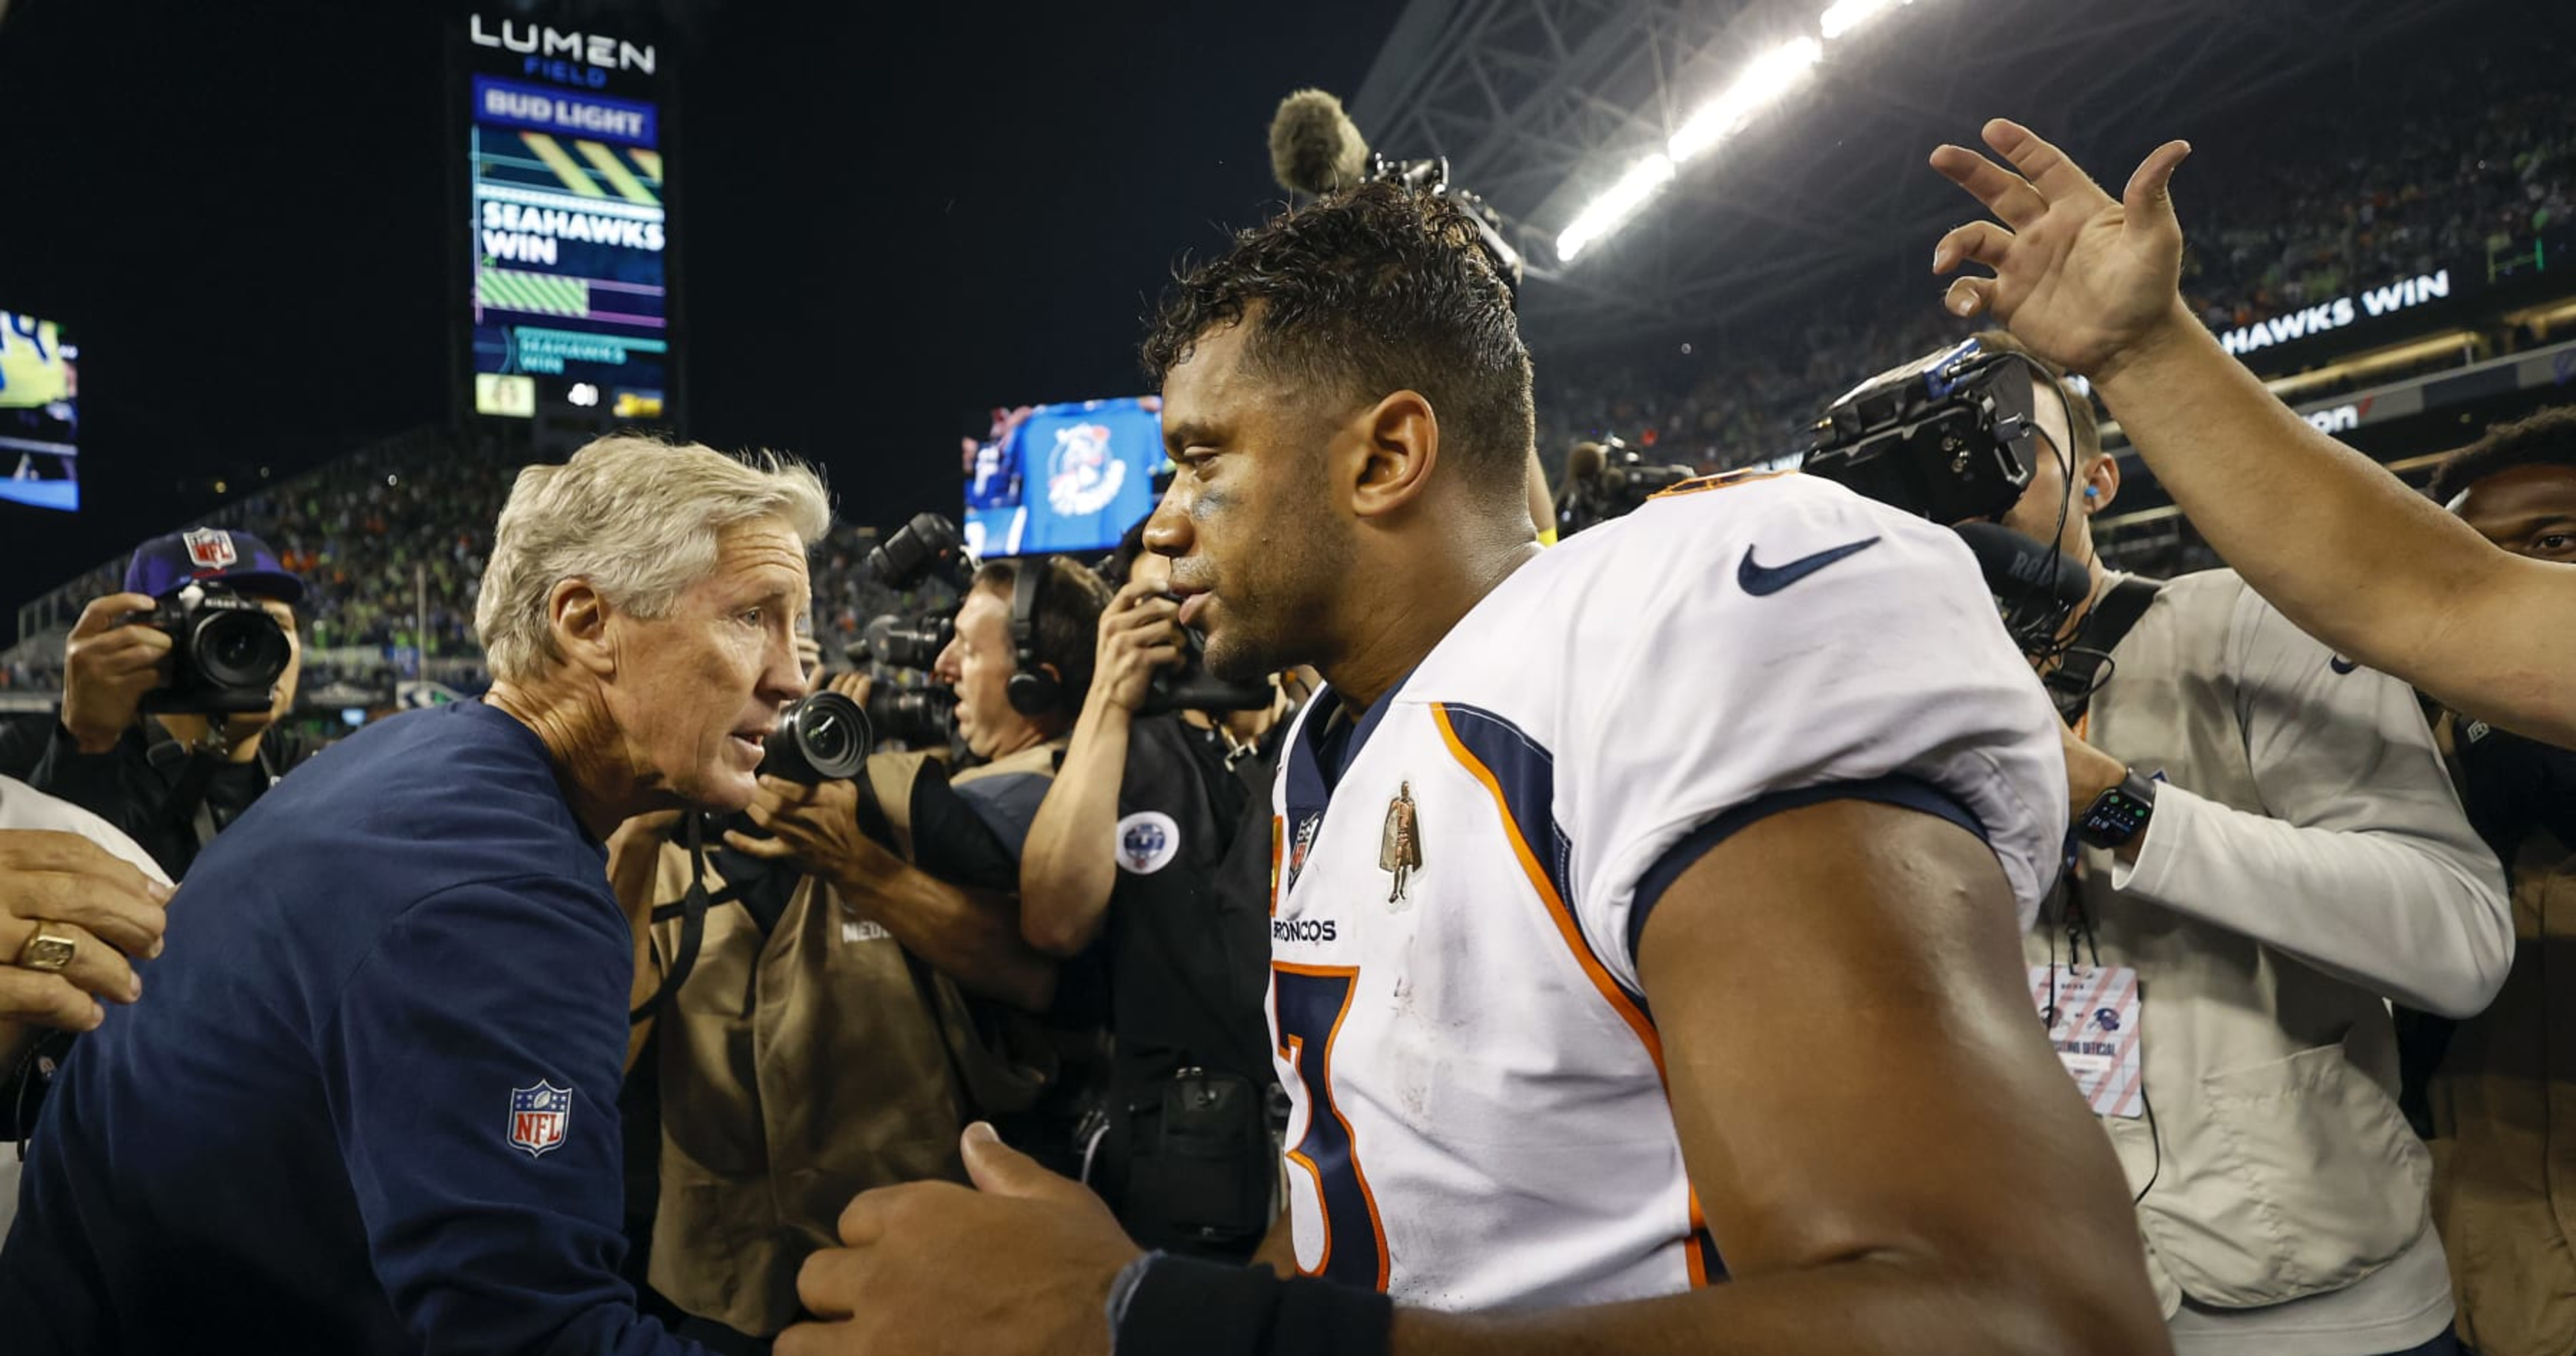 Seattle Seahawks coach Pete Carroll comfortable with Russell Wilson playing  baseball in offseason